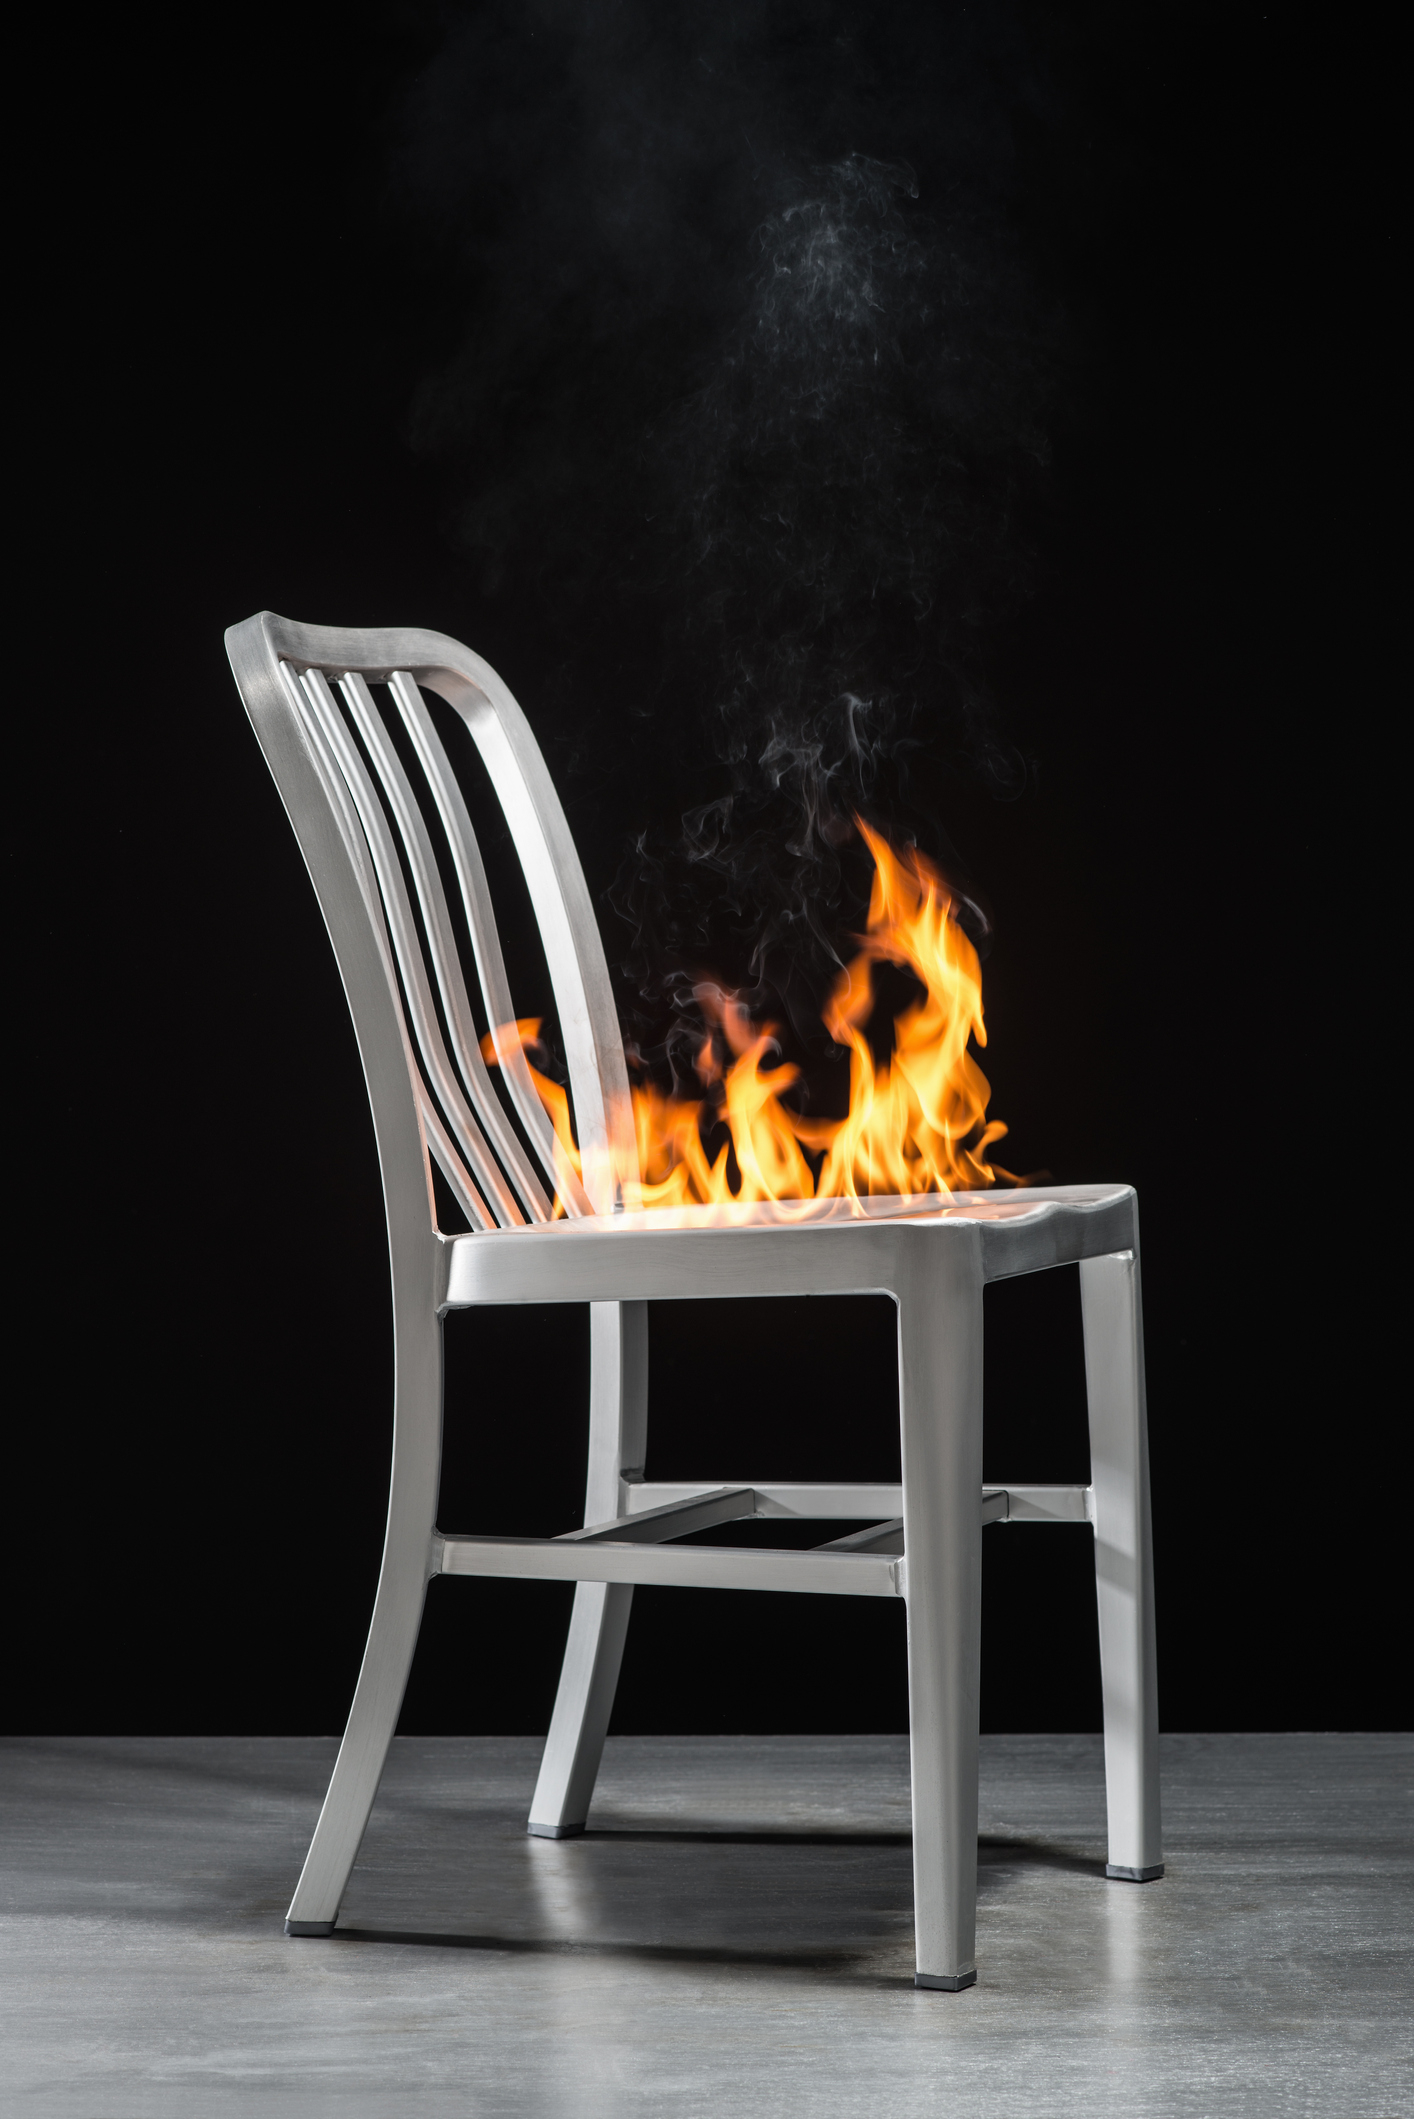 a chair on fire